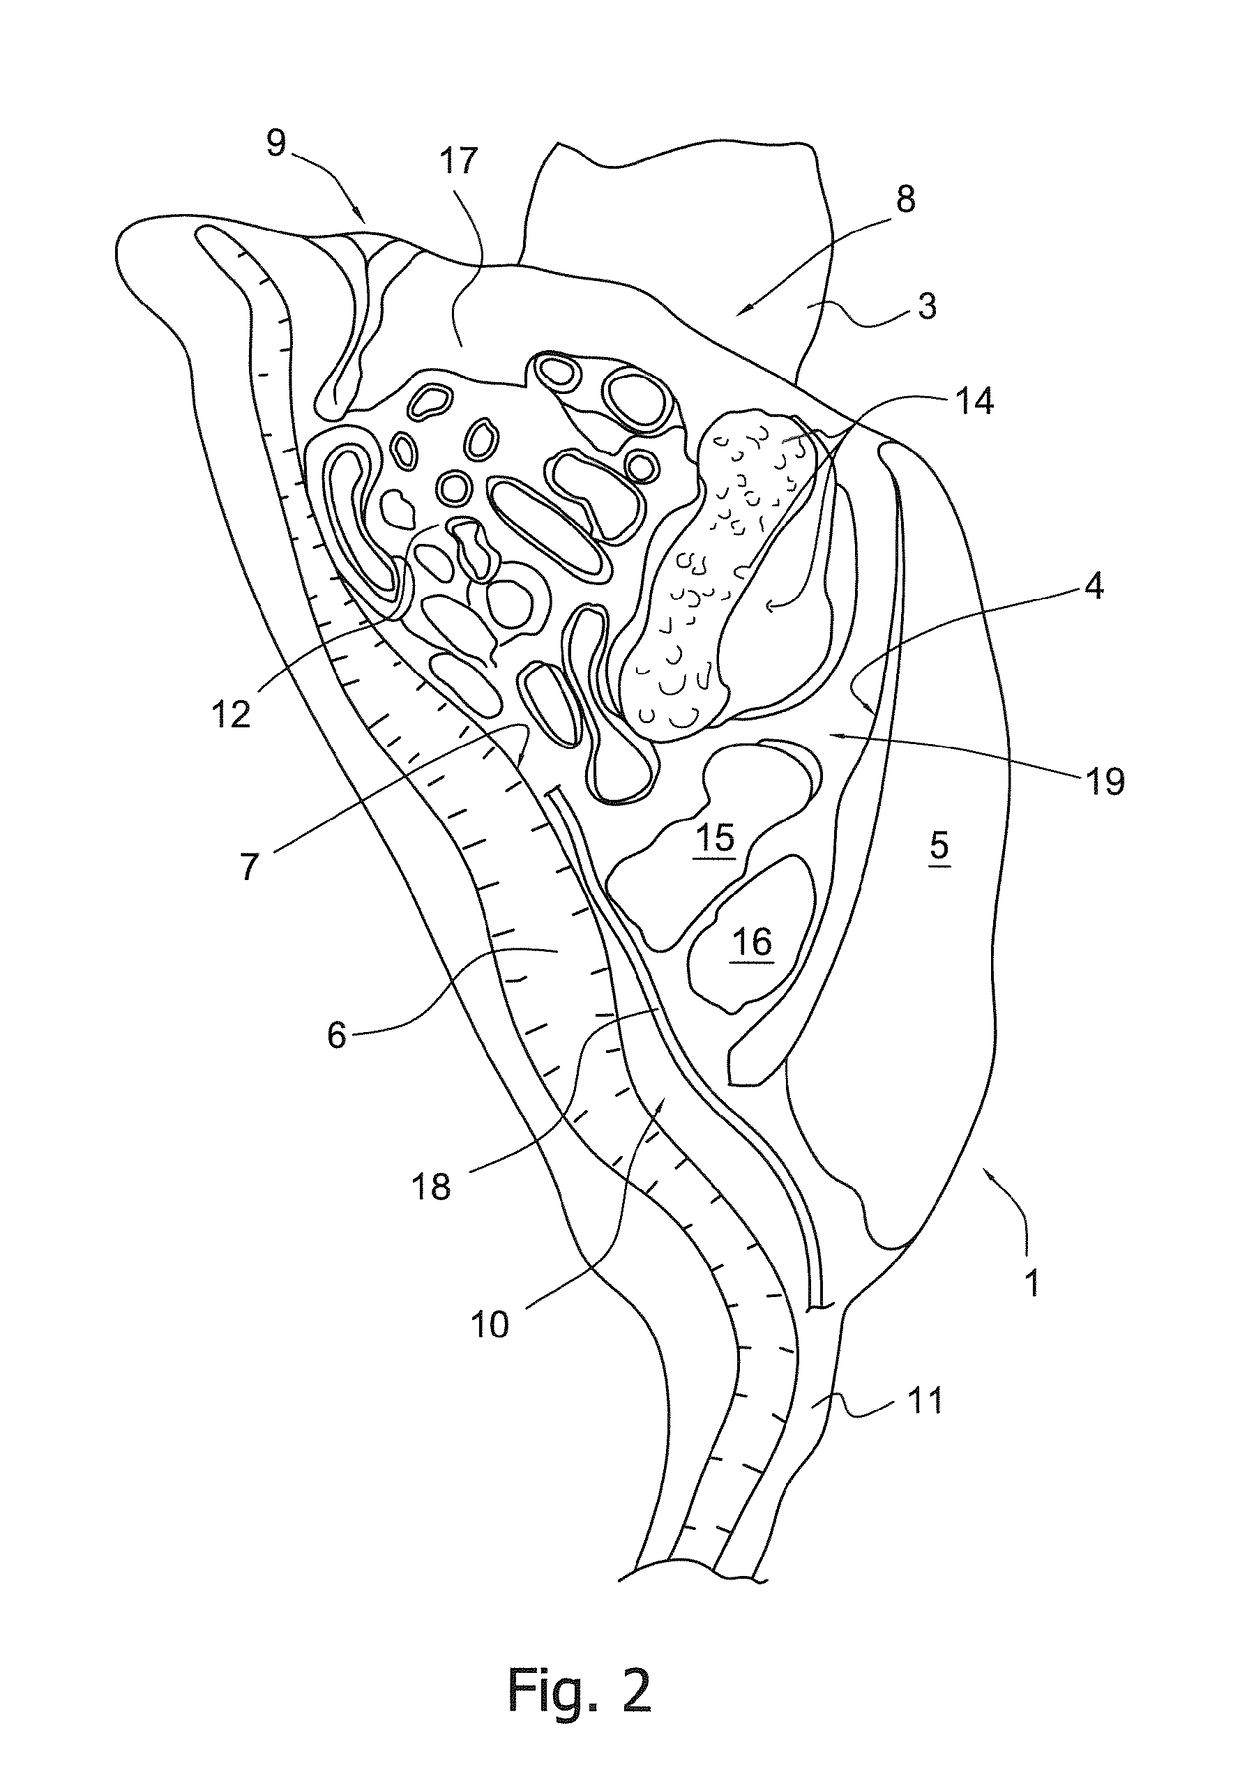 Method and device for evisceration of slaughtered poultry